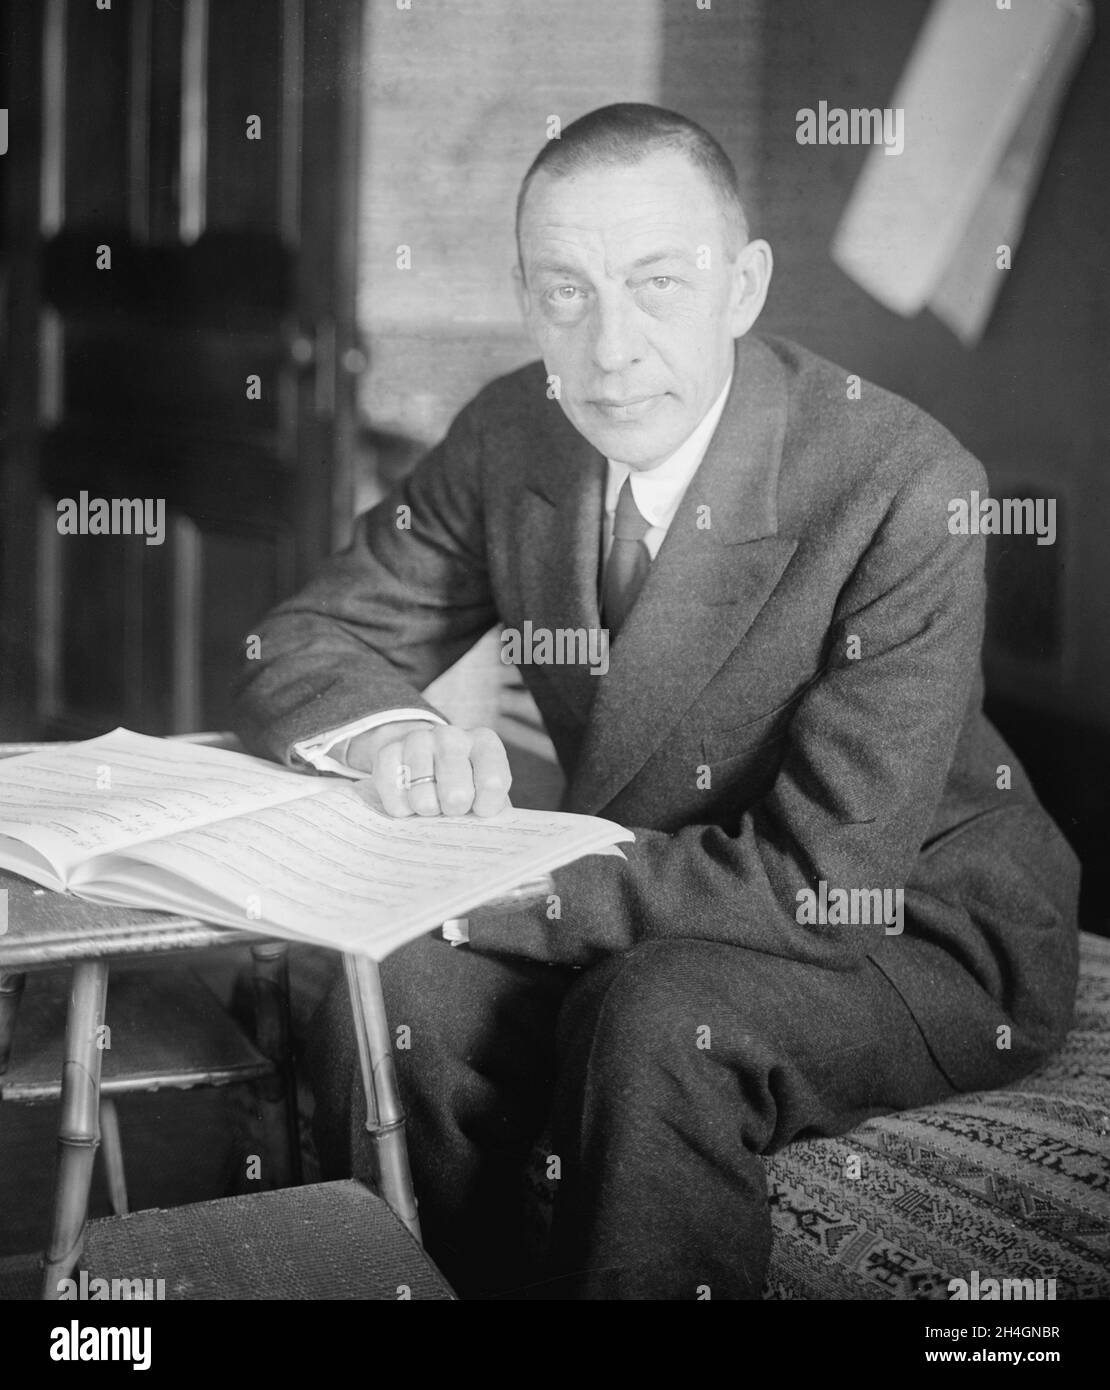 A portrait of  the Russian composer Sergei Rachmaninoff Stock Photo